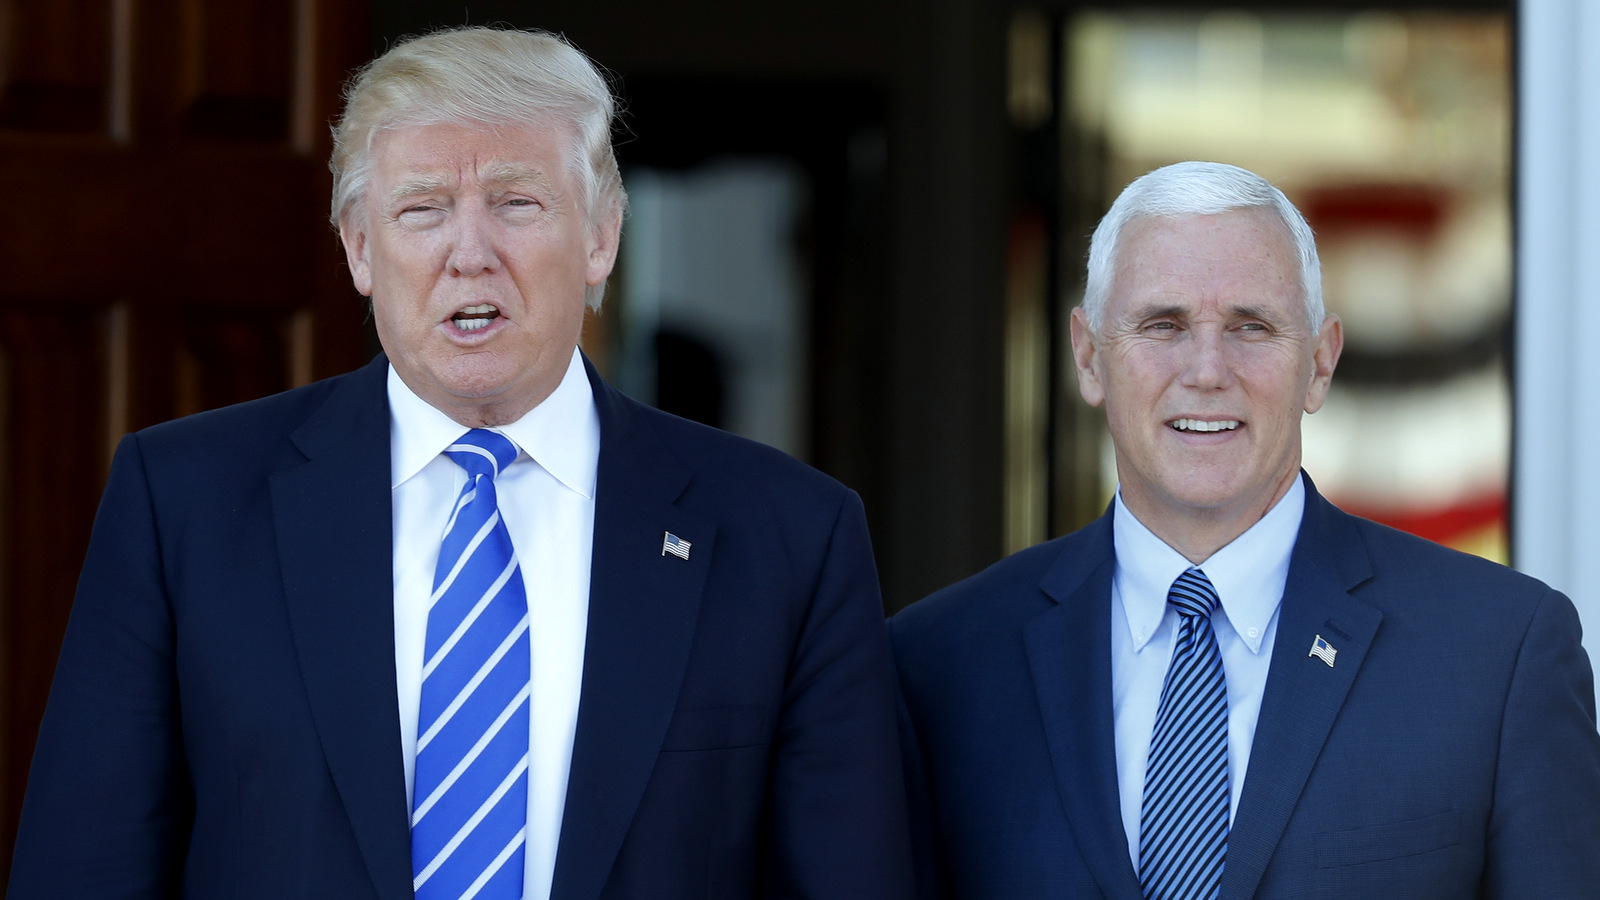 President-elect Donald Trump and Vice President-elect Mike Pence pause for photographs as they arrive at the Trump National Golf Club Bedminster clubhouse in Bedminster, N.J., Saturday, Nov. 19, 2016. (AP Photo/Carolyn Kaster)